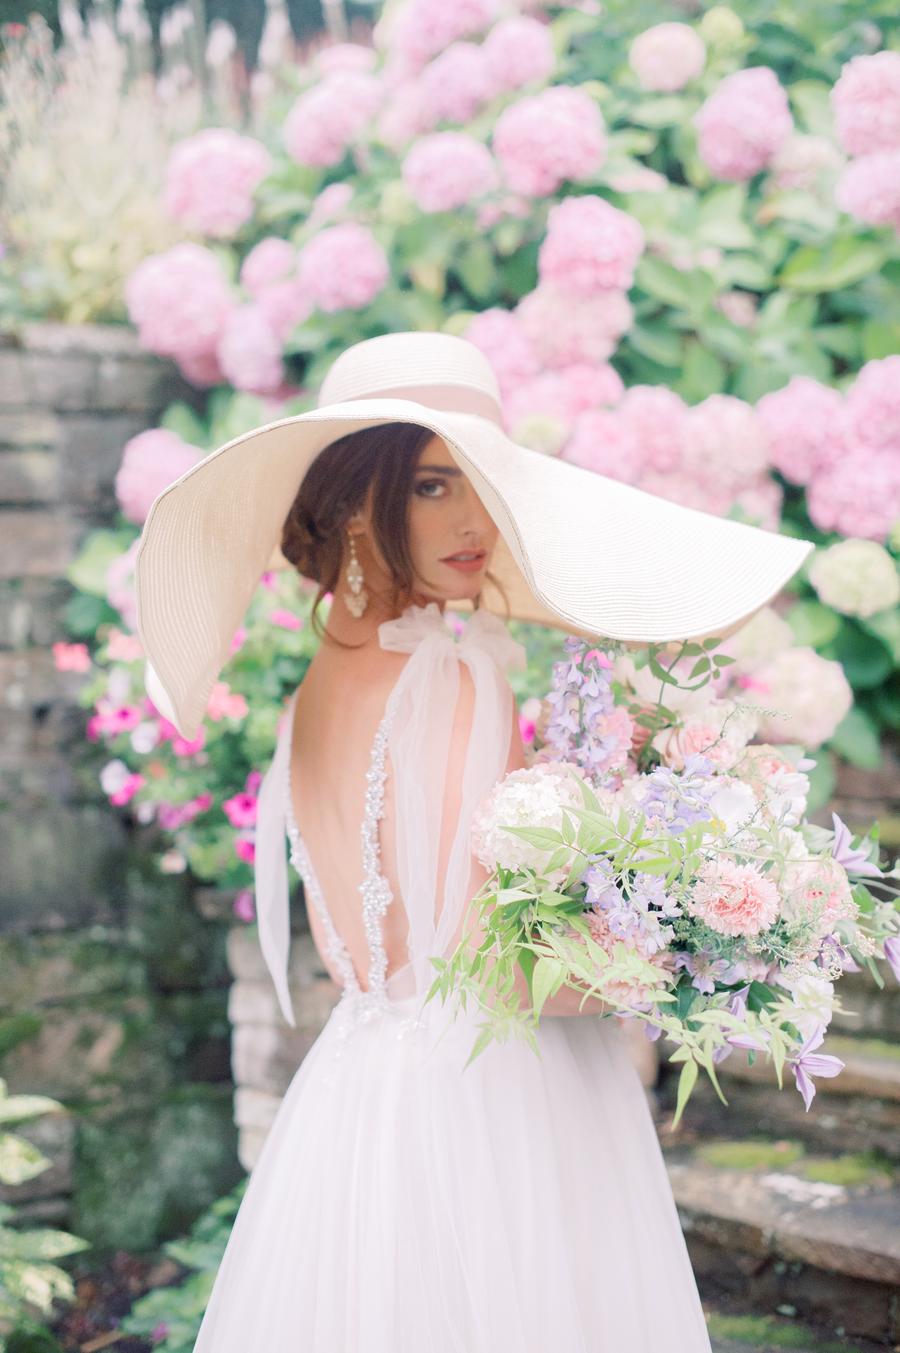 Romantic English garden wedding inspiration at a historic European estate with an Inbal Dror gown, organic pastel flowers by Moss & Stone and an oversized sun hat || Photography by Julie Livingston with design + planning by Willow and Oak Events